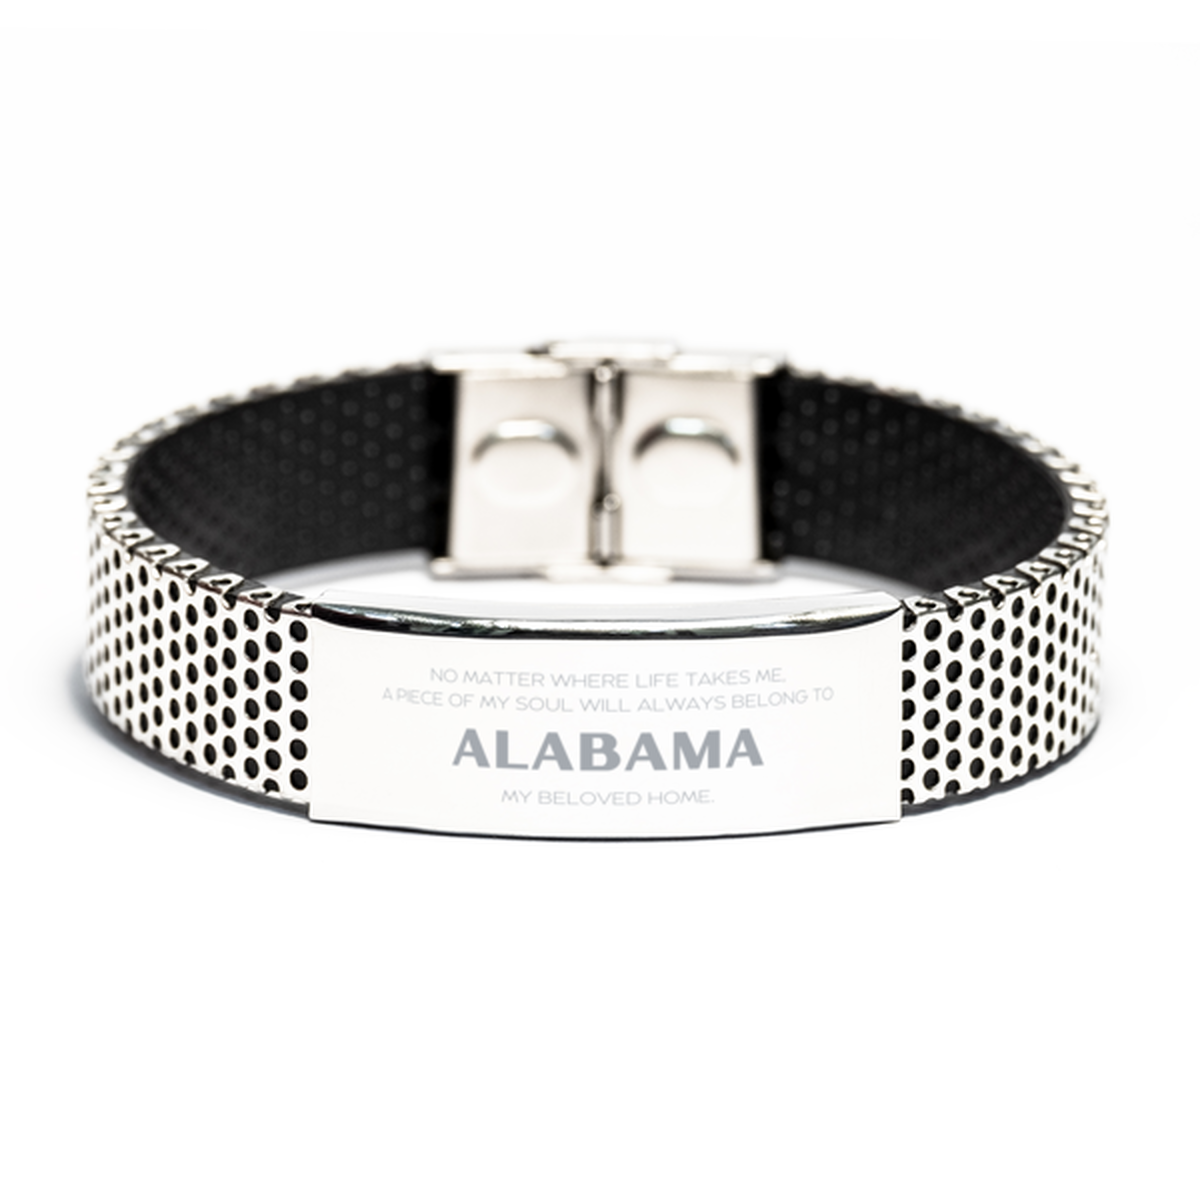 Love Alabama State Gifts, My soul will always belong to Alabama, Proud Stainless Steel Bracelet, Birthday Unique Gifts For Alabama Men, Women, Friends